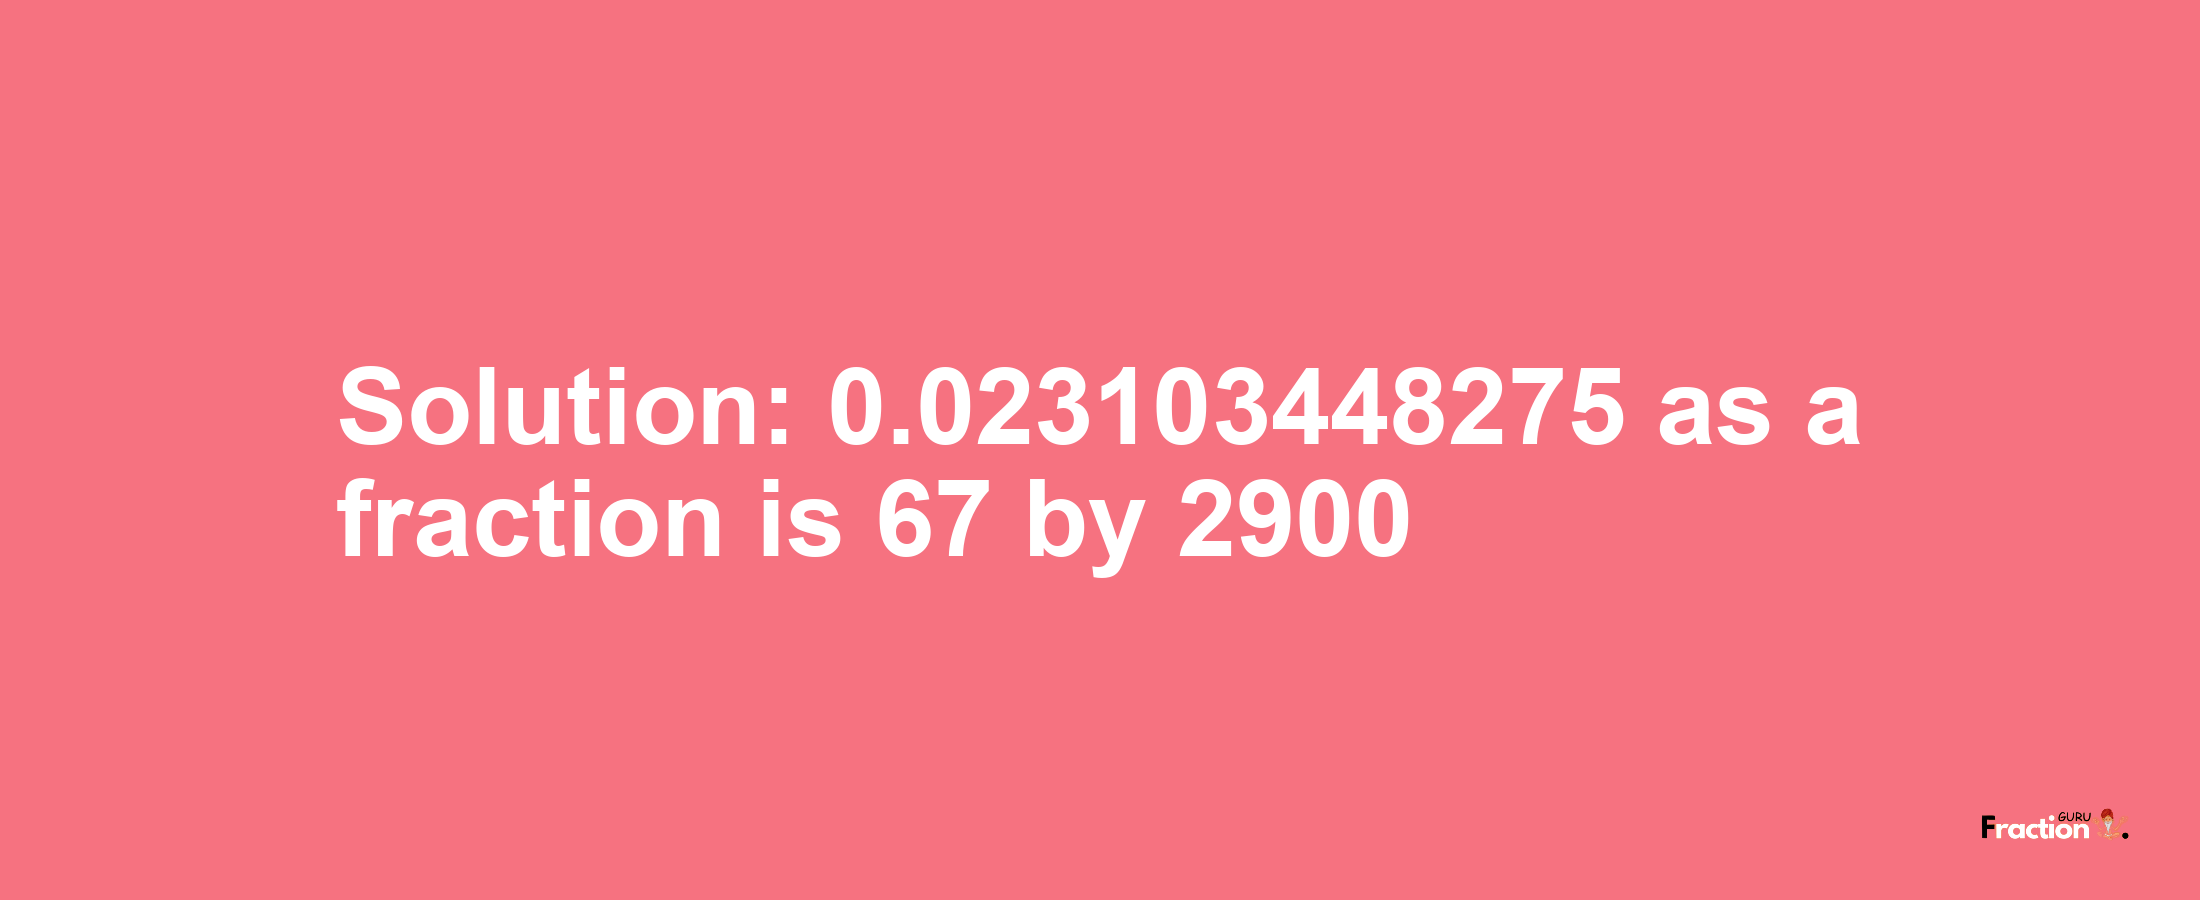 Solution:0.023103448275 as a fraction is 67/2900